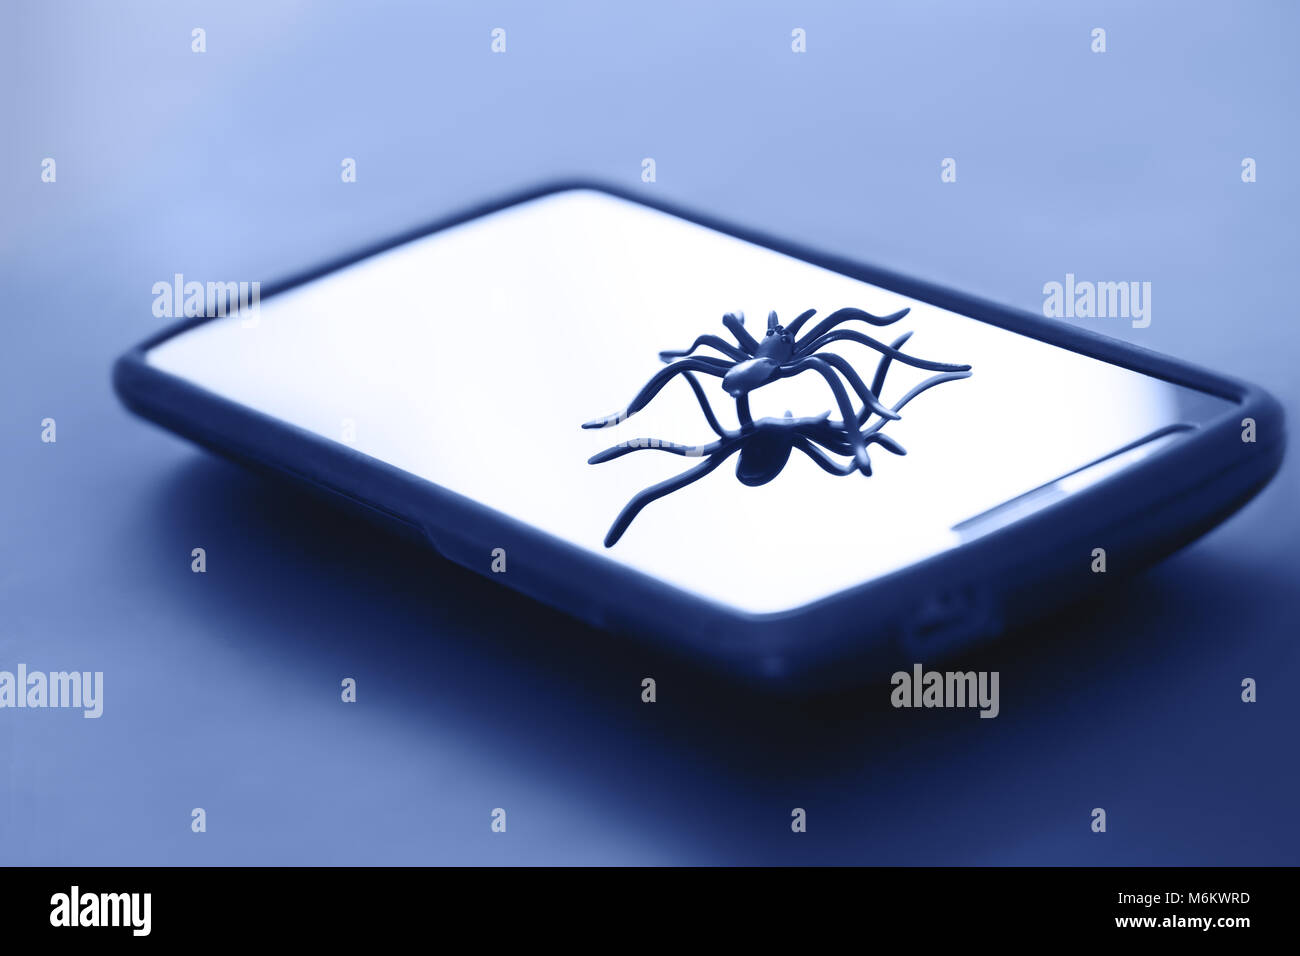 Cute spider toy posing on surface of gadget display. Plastic spider toy in action on surface of device screen. Best picture for digital communication. Stock Photo